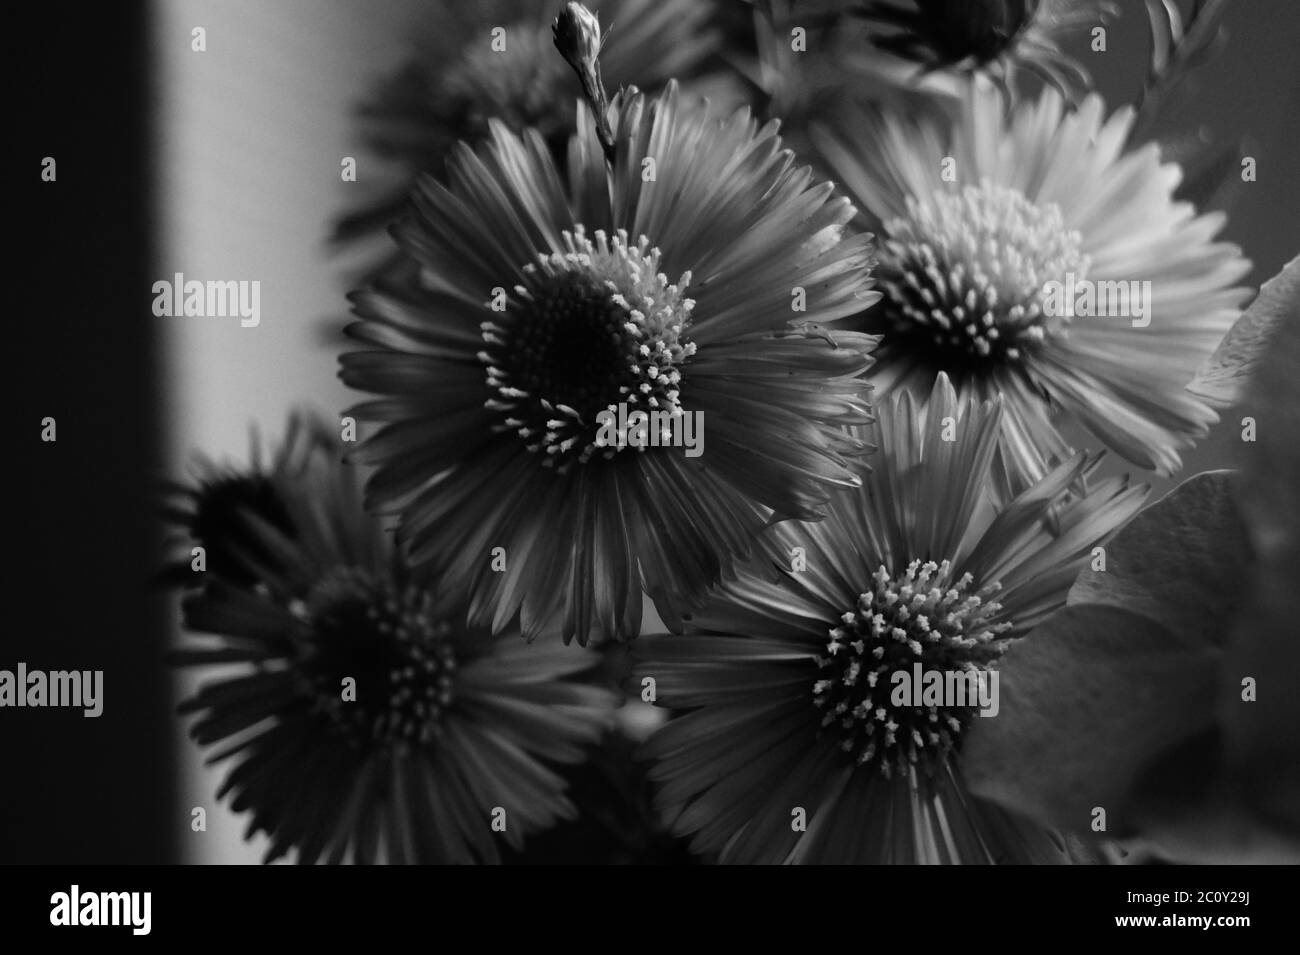 A close up of flowers, sad depressed black and white  Stock Photo